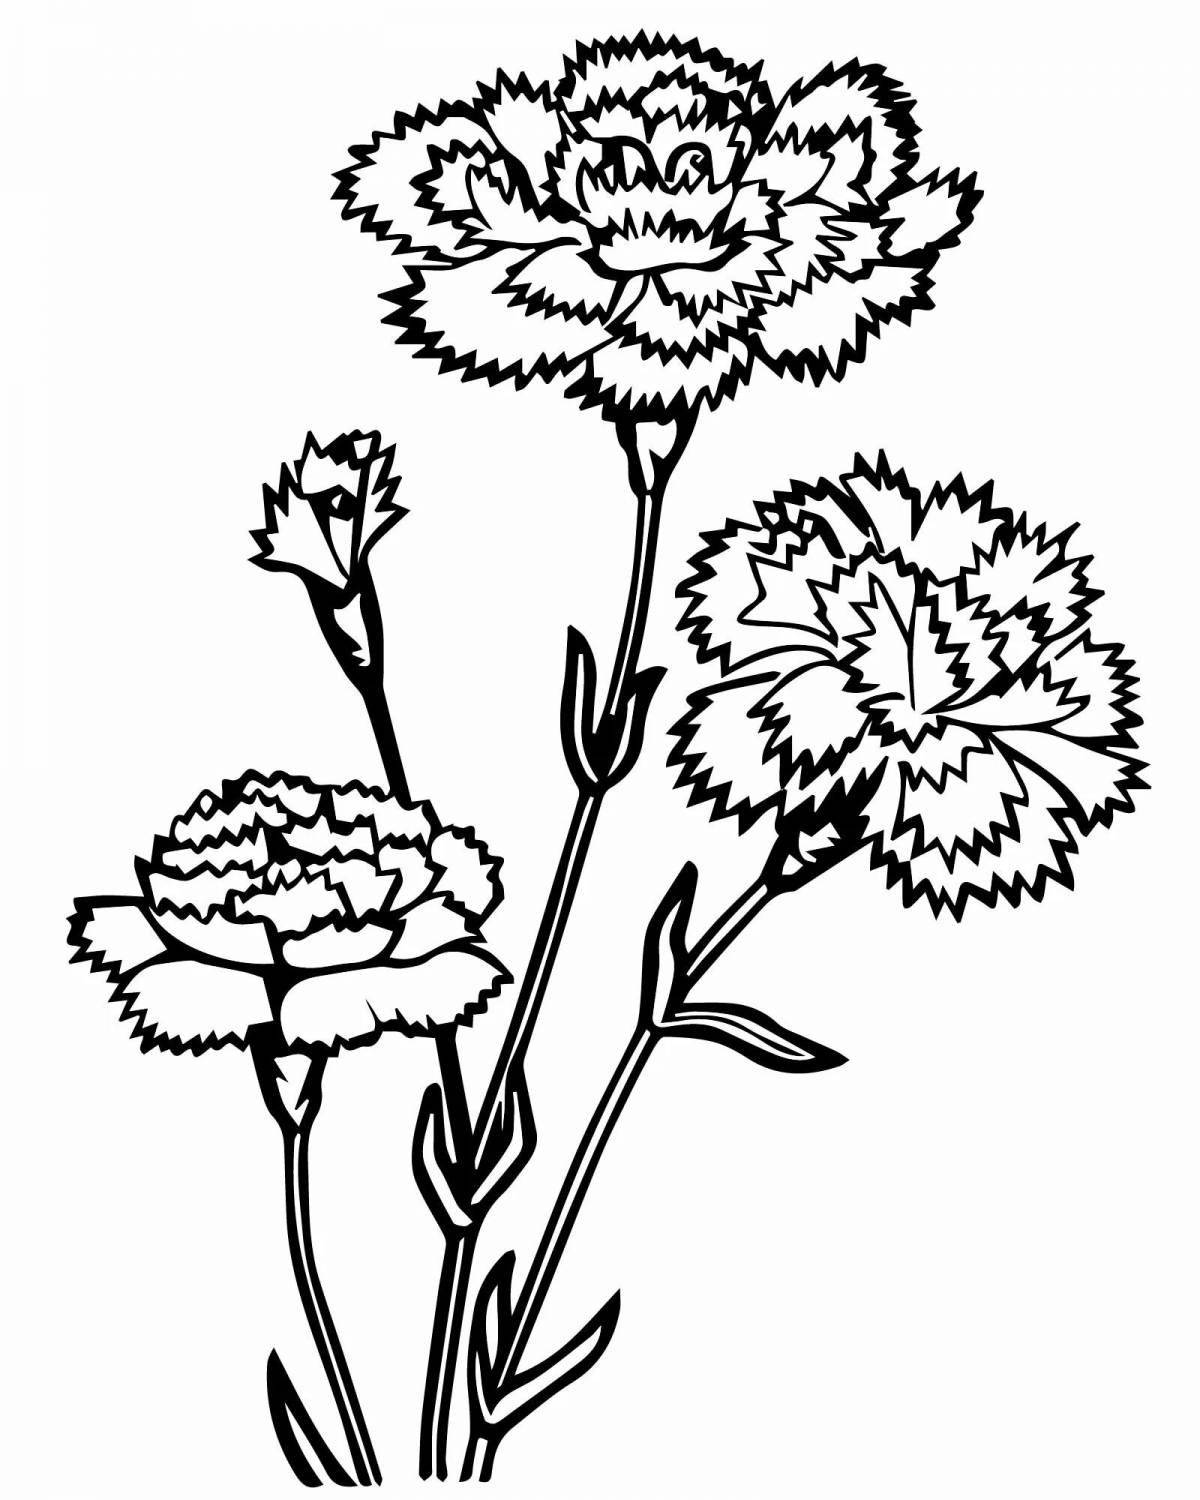 Coloring book with a playful carnation pattern